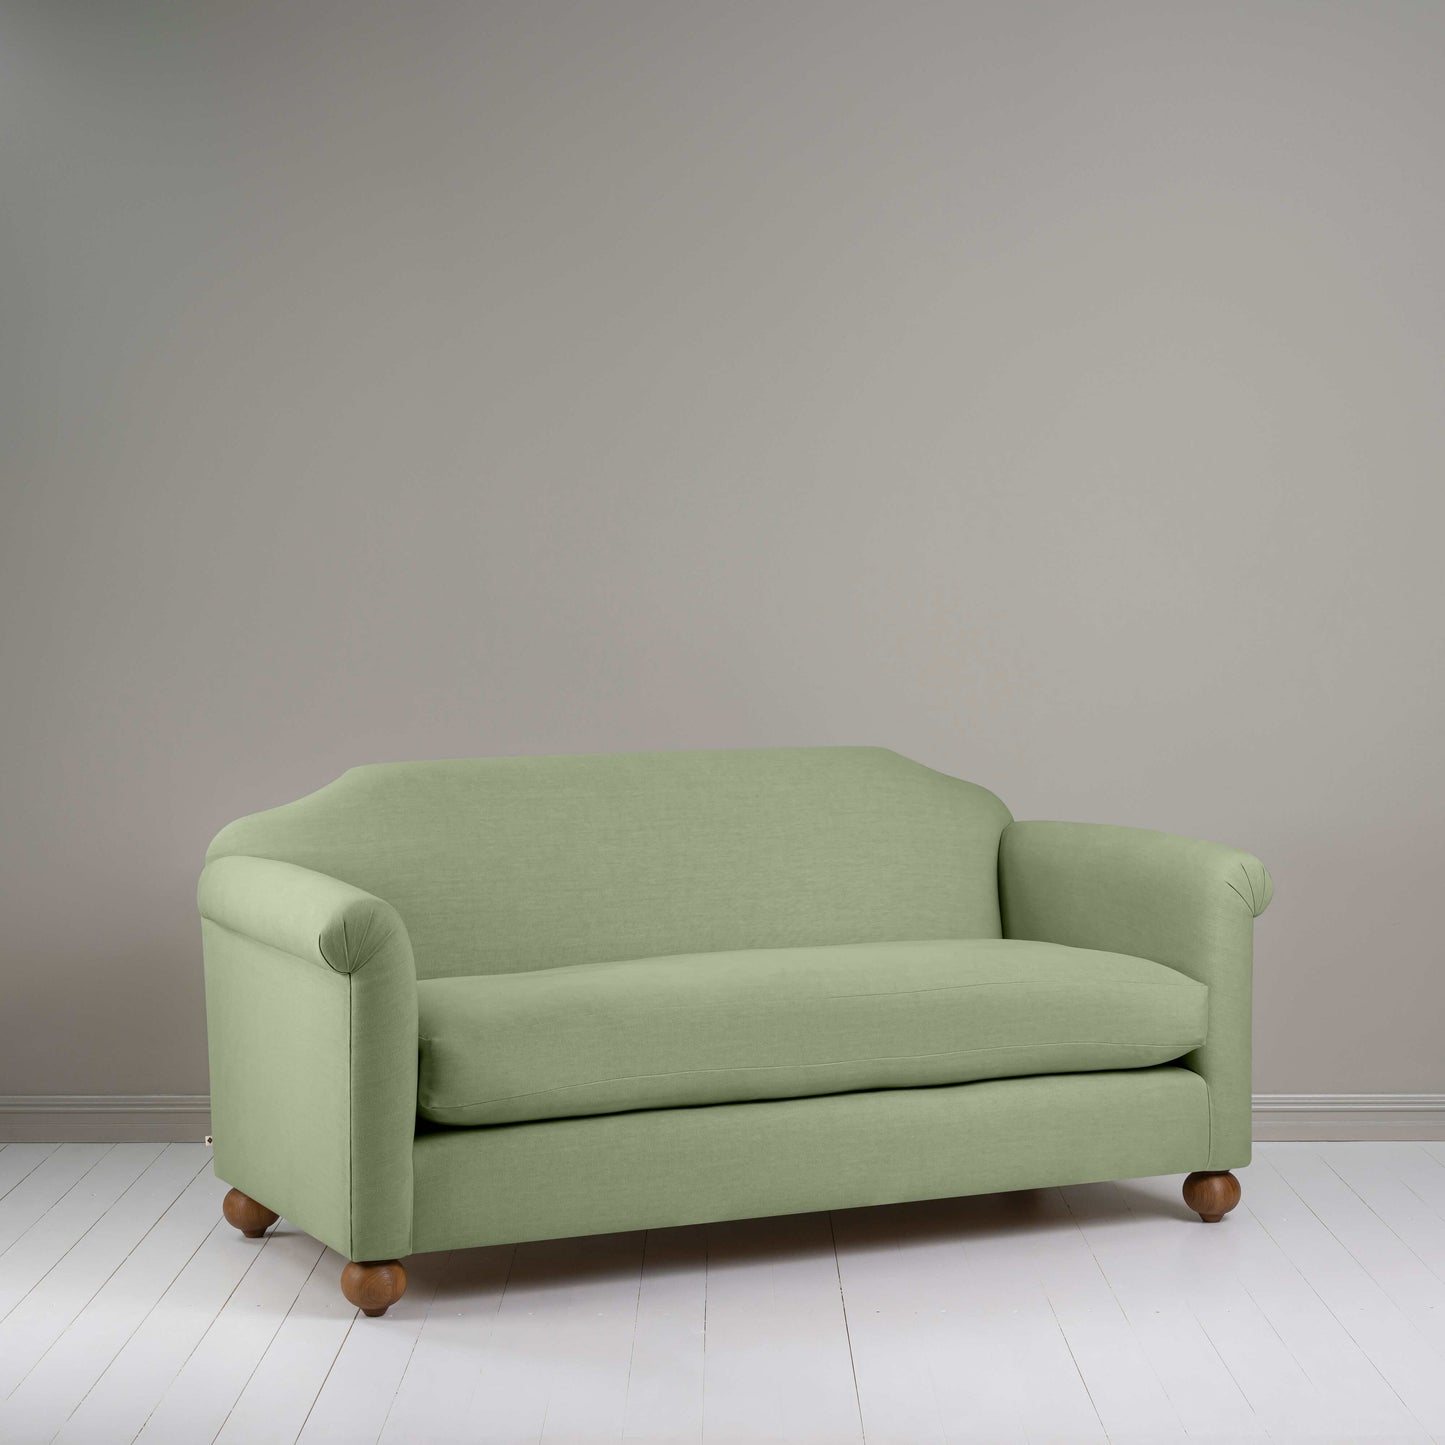 Dolittle 3 Seater Sofa in Laidback Linen Moss